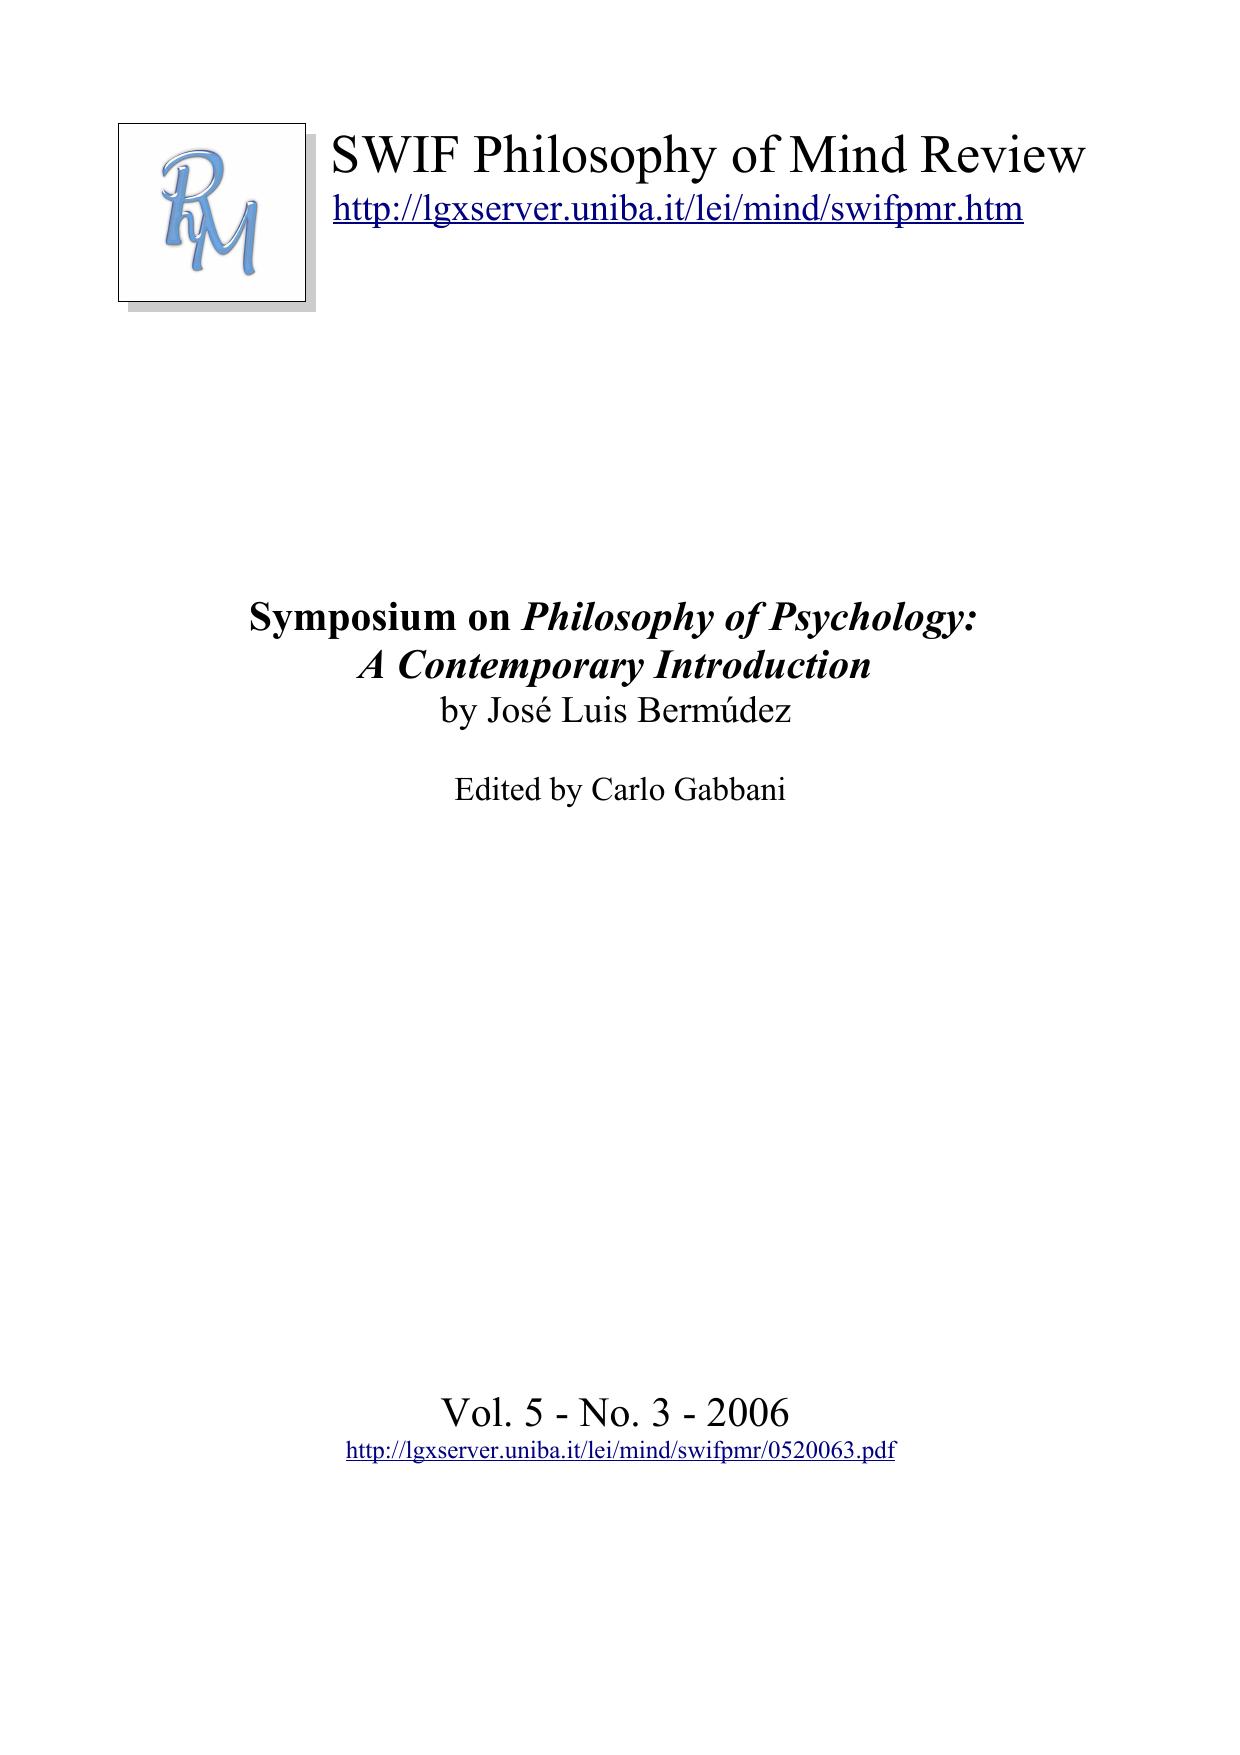 Rise or Fall of the Philosophy of Psychology - A Contemporary Introduction